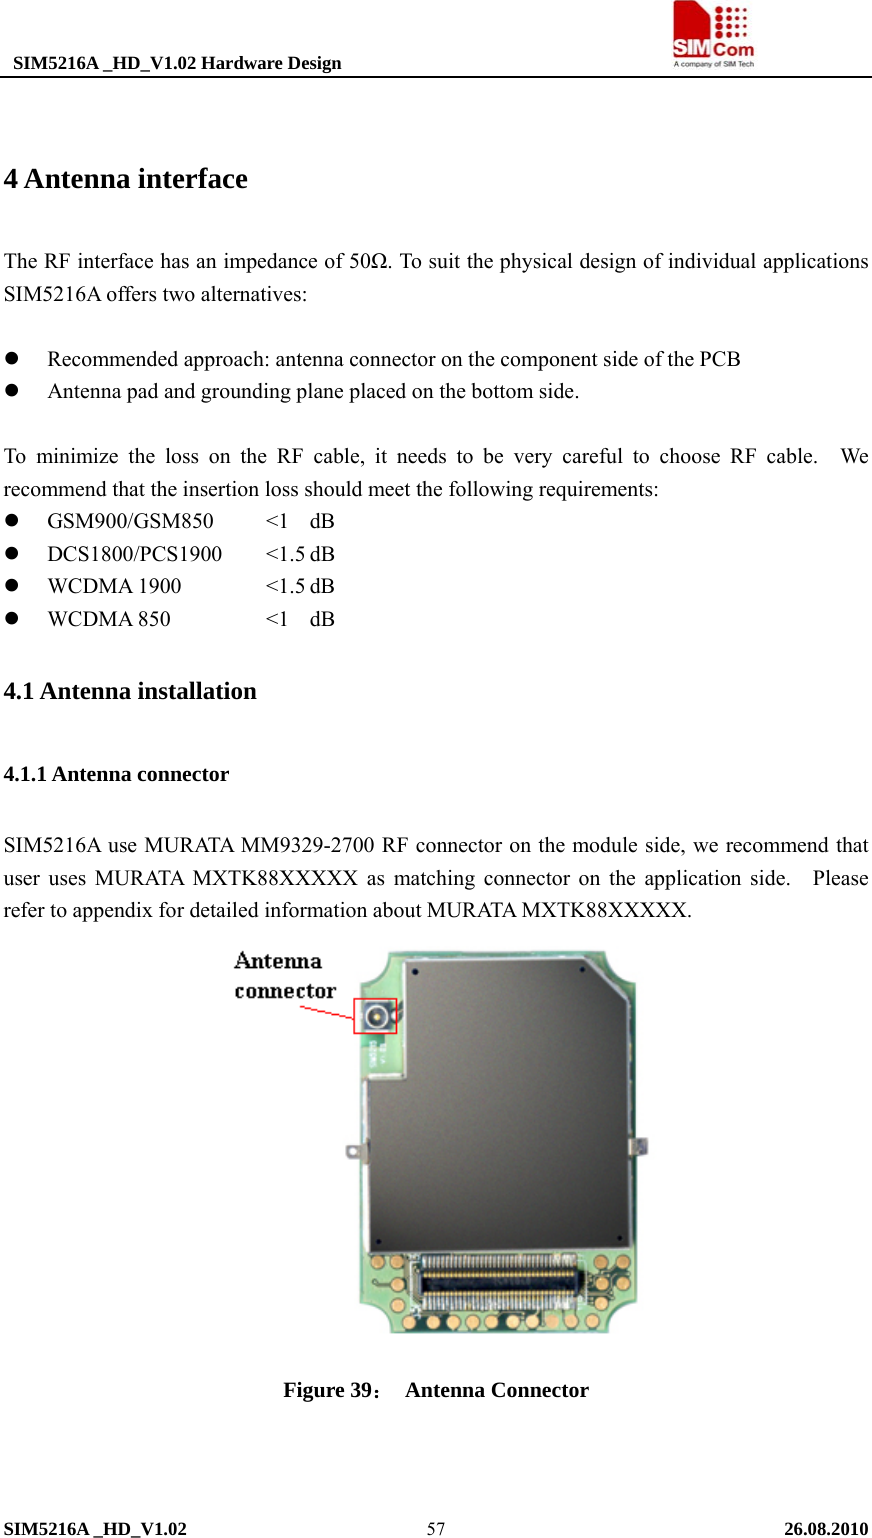  SIM5216A _HD_V1.02 Hardware Design                                     SIM5216A _HD_V1.02   26.08.2010   57 4 Antenna interface The RF interface has an impedance of 50Ω. To suit the physical design of individual applications SIM5216A offers two alternatives:  z Recommended approach: antenna connector on the component side of the PCB   z Antenna pad and grounding plane placed on the bottom side.    To minimize the loss on the RF cable, it needs to be very careful to choose RF cable.  We recommend that the insertion loss should meet the following requirements: z GSM900/GSM850   &lt;1  dB z DCS1800/PCS1900   &lt;1.5 dB z WCDMA 1900    &lt;1.5 dB z WCDMA 850   &lt;1 dB 4.1 Antenna installation 4.1.1 Antenna connector SIM5216A use MURATA MM9329-2700 RF connector on the module side, we recommend that user uses MURATA MXTK88XXXXX as matching connector on the application side.   Please refer to appendix for detailed information about MURATA MXTK88XXXXX.    Figure 39： Antenna Connector   